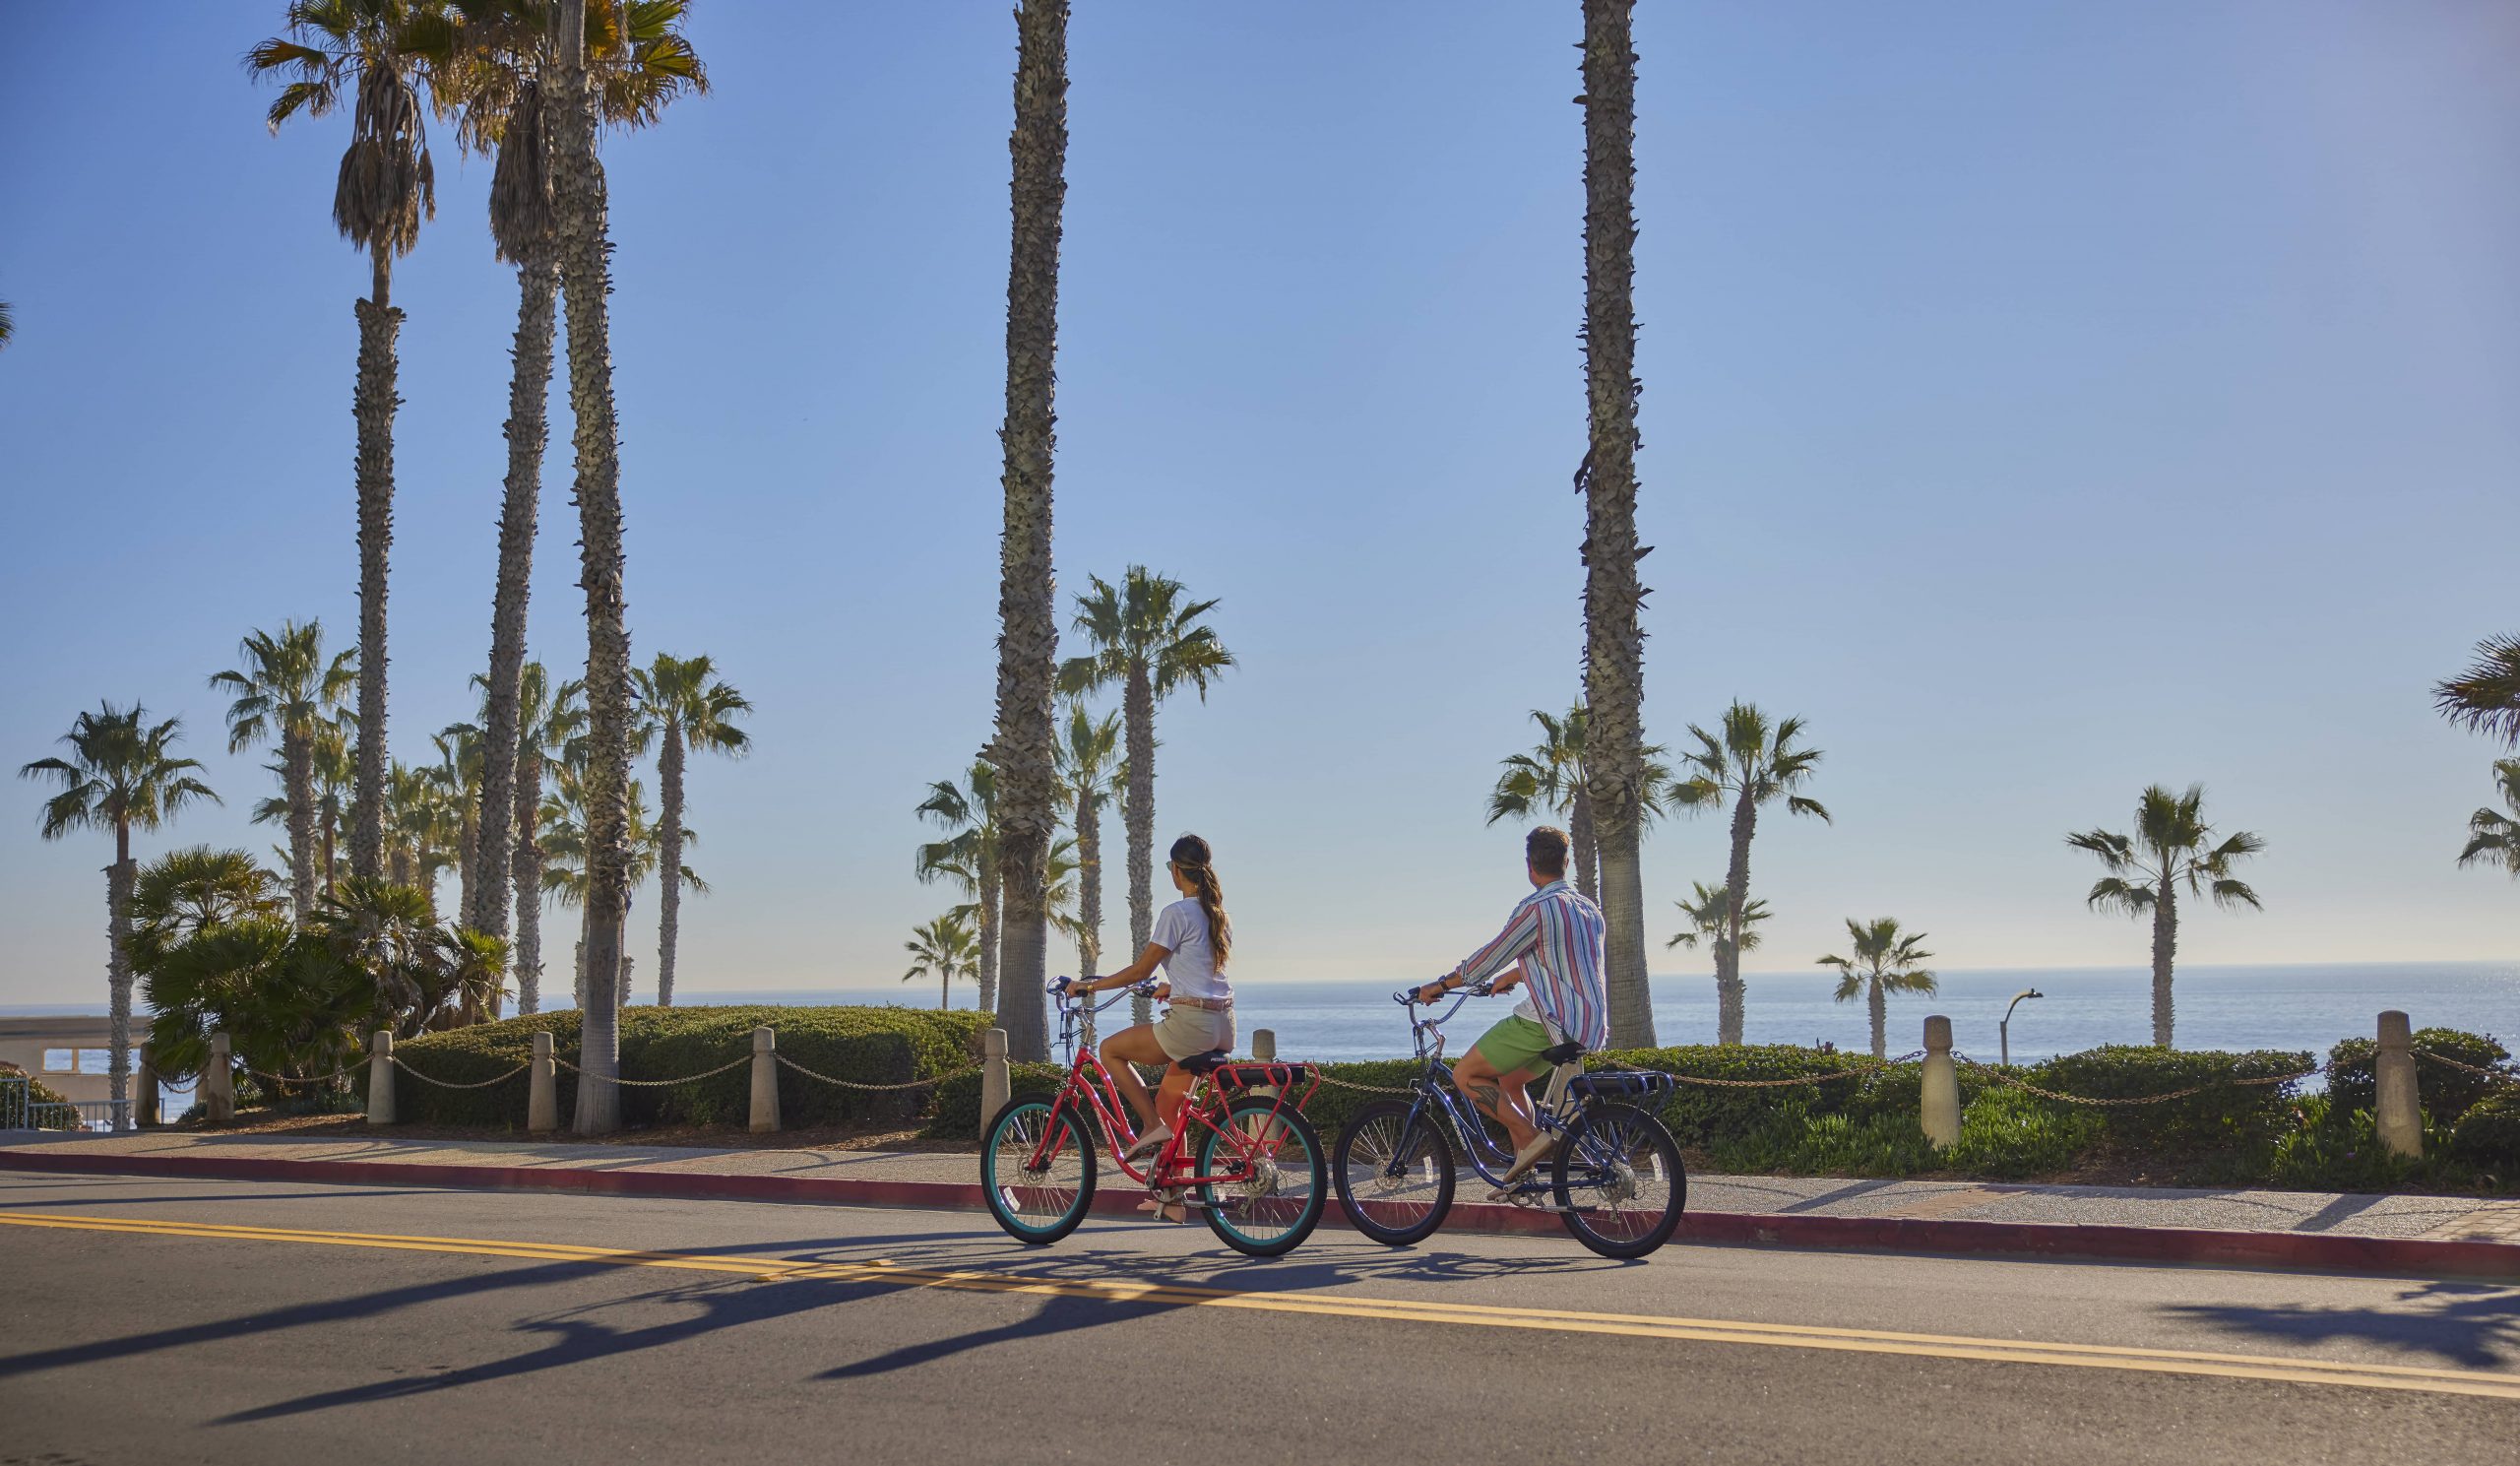 Couple riding a bike surrounded by palm trees in Oceanside